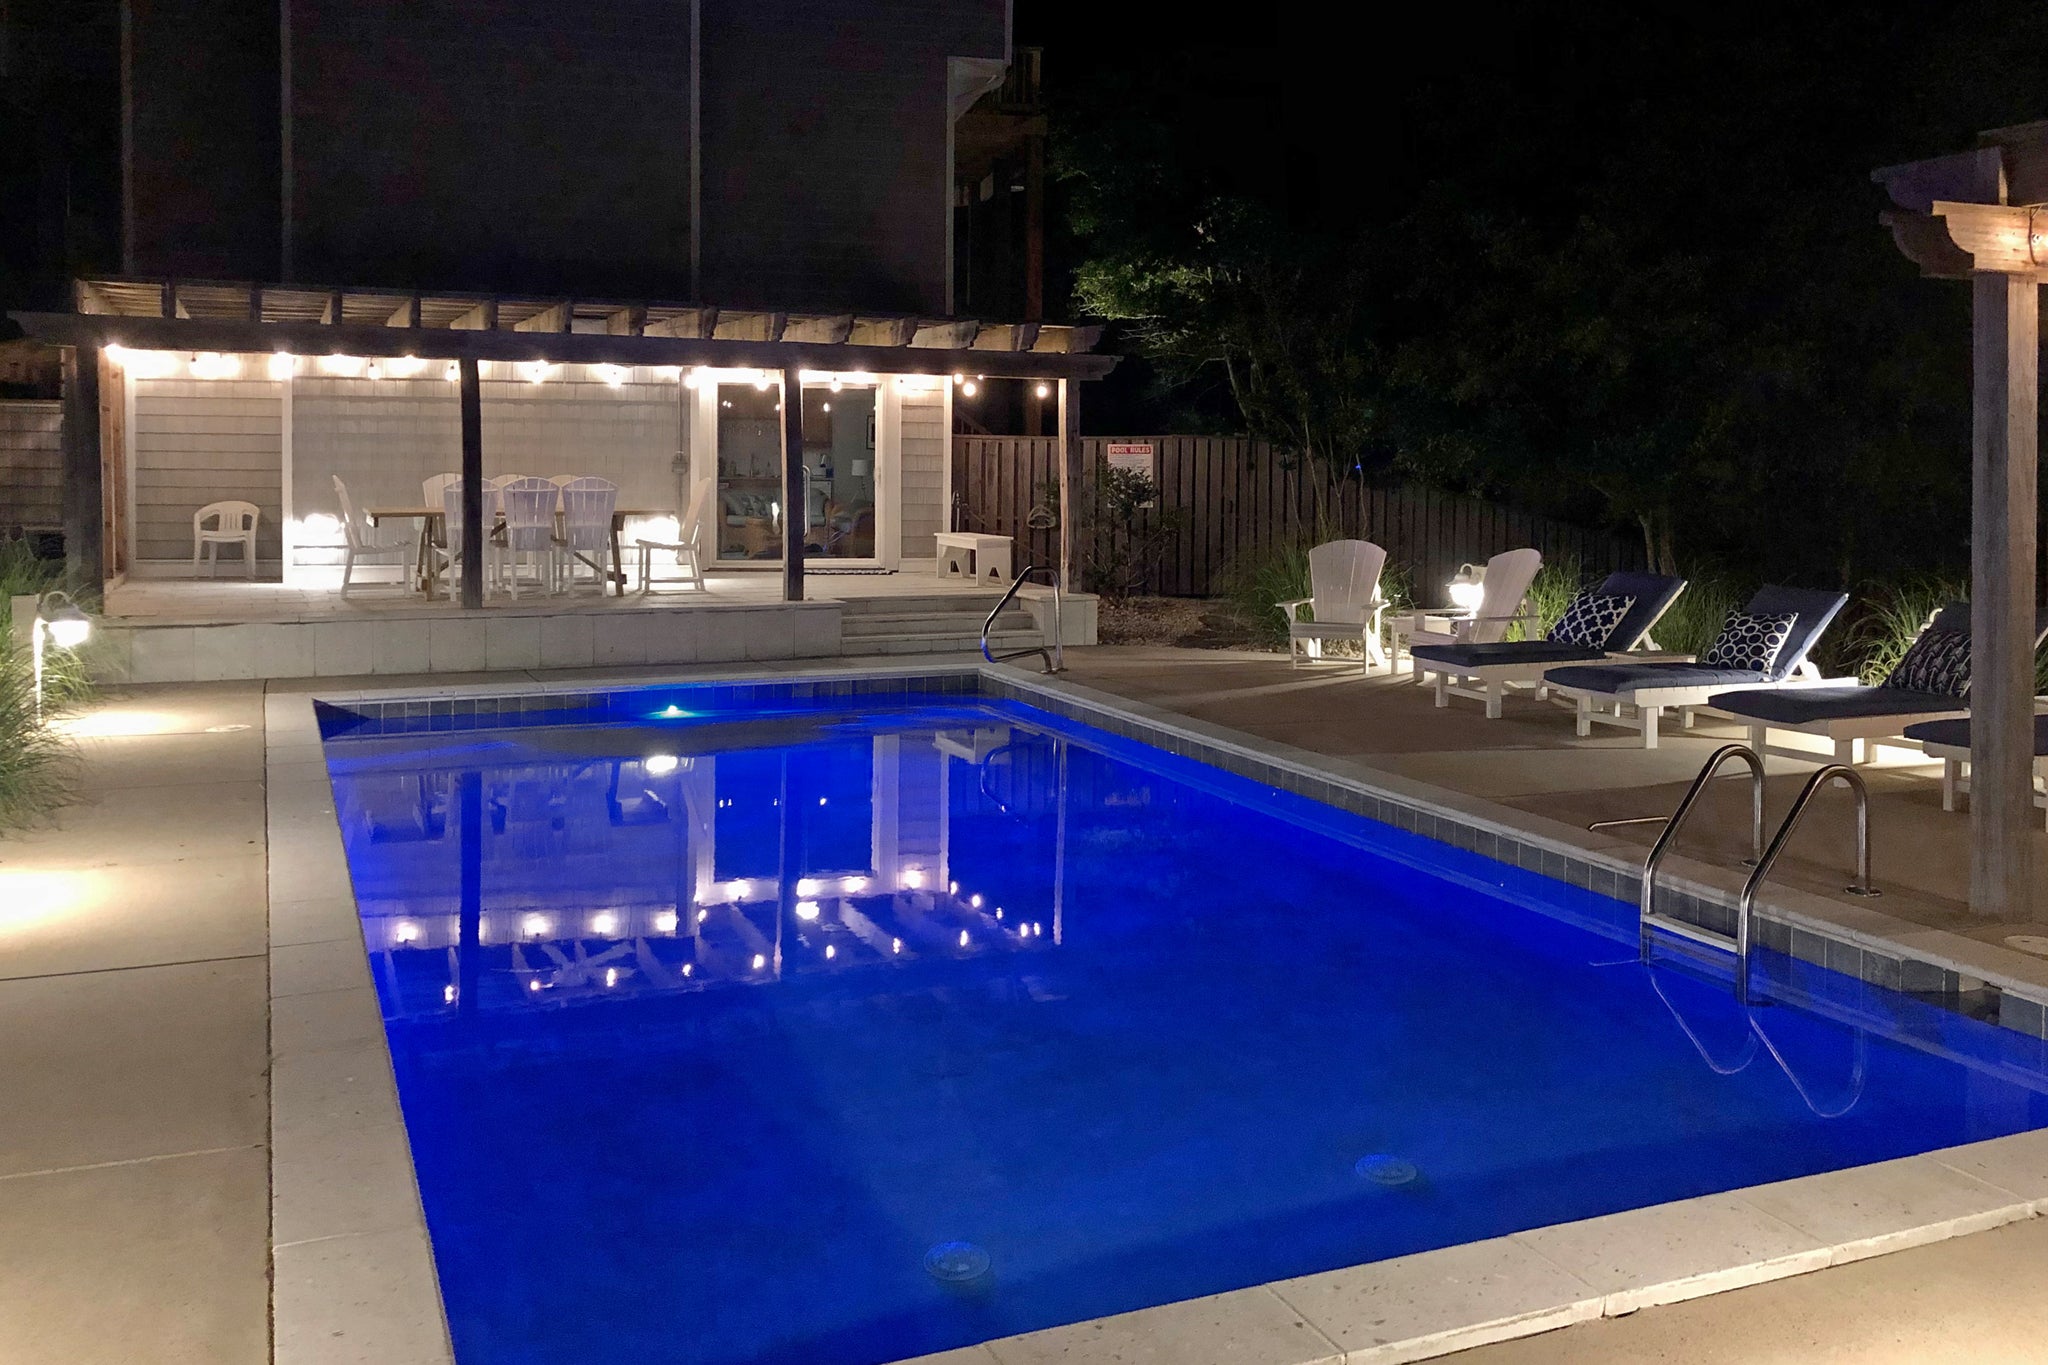 DU100: Duck Side Of The Moon | Private Pool Area At Night